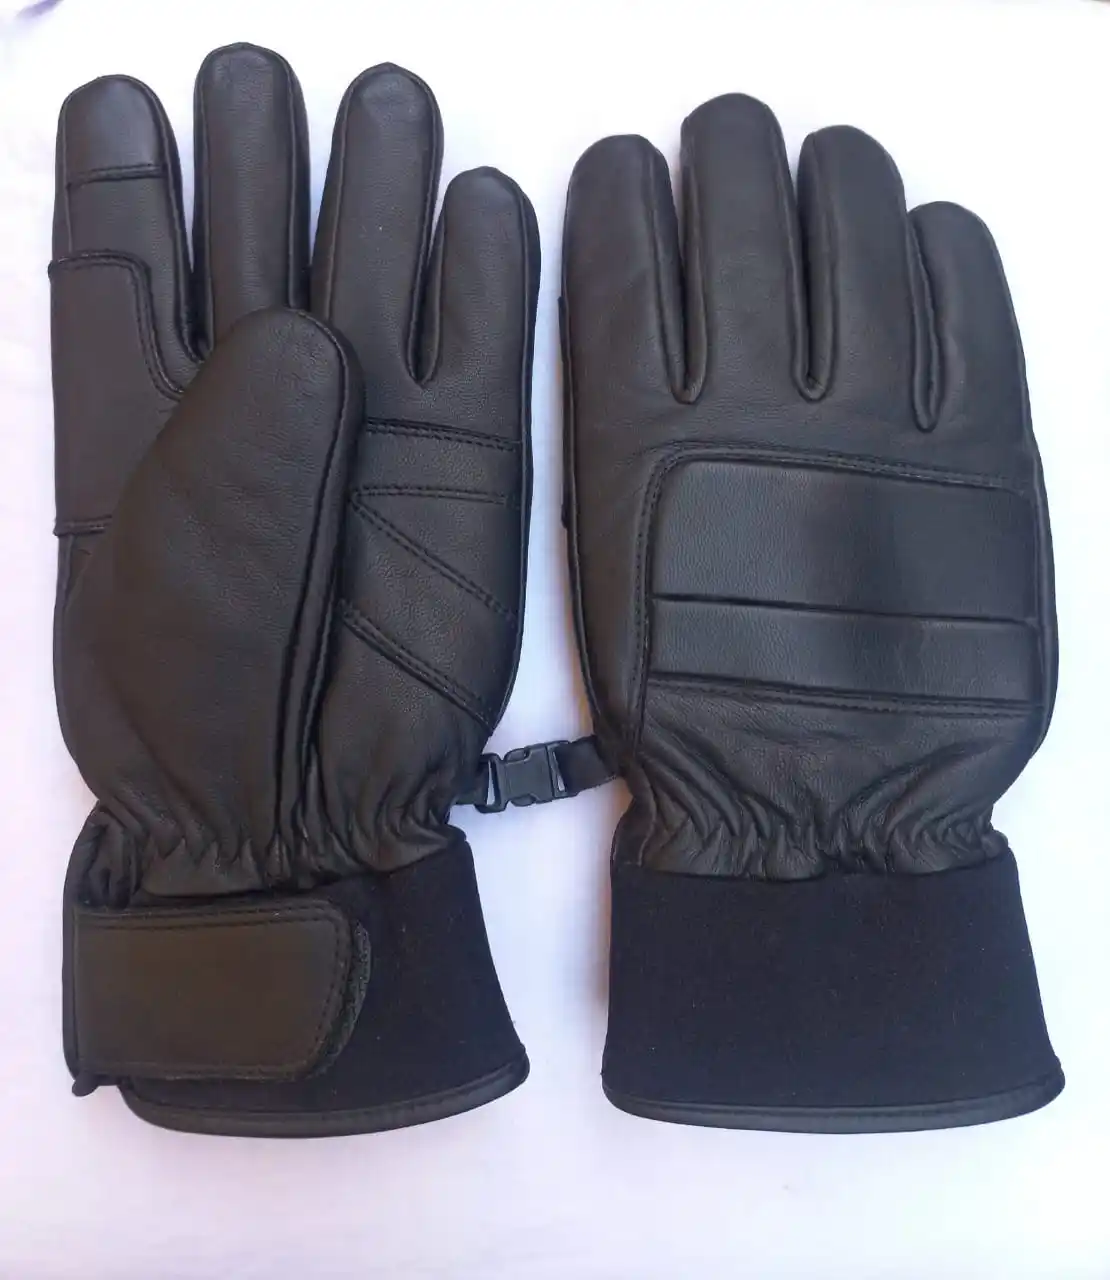 Diamond Style Impact Protection Waterproof Cold Weather Performance Warm Insulated Leather Ski Gloves Snow Board Gloves